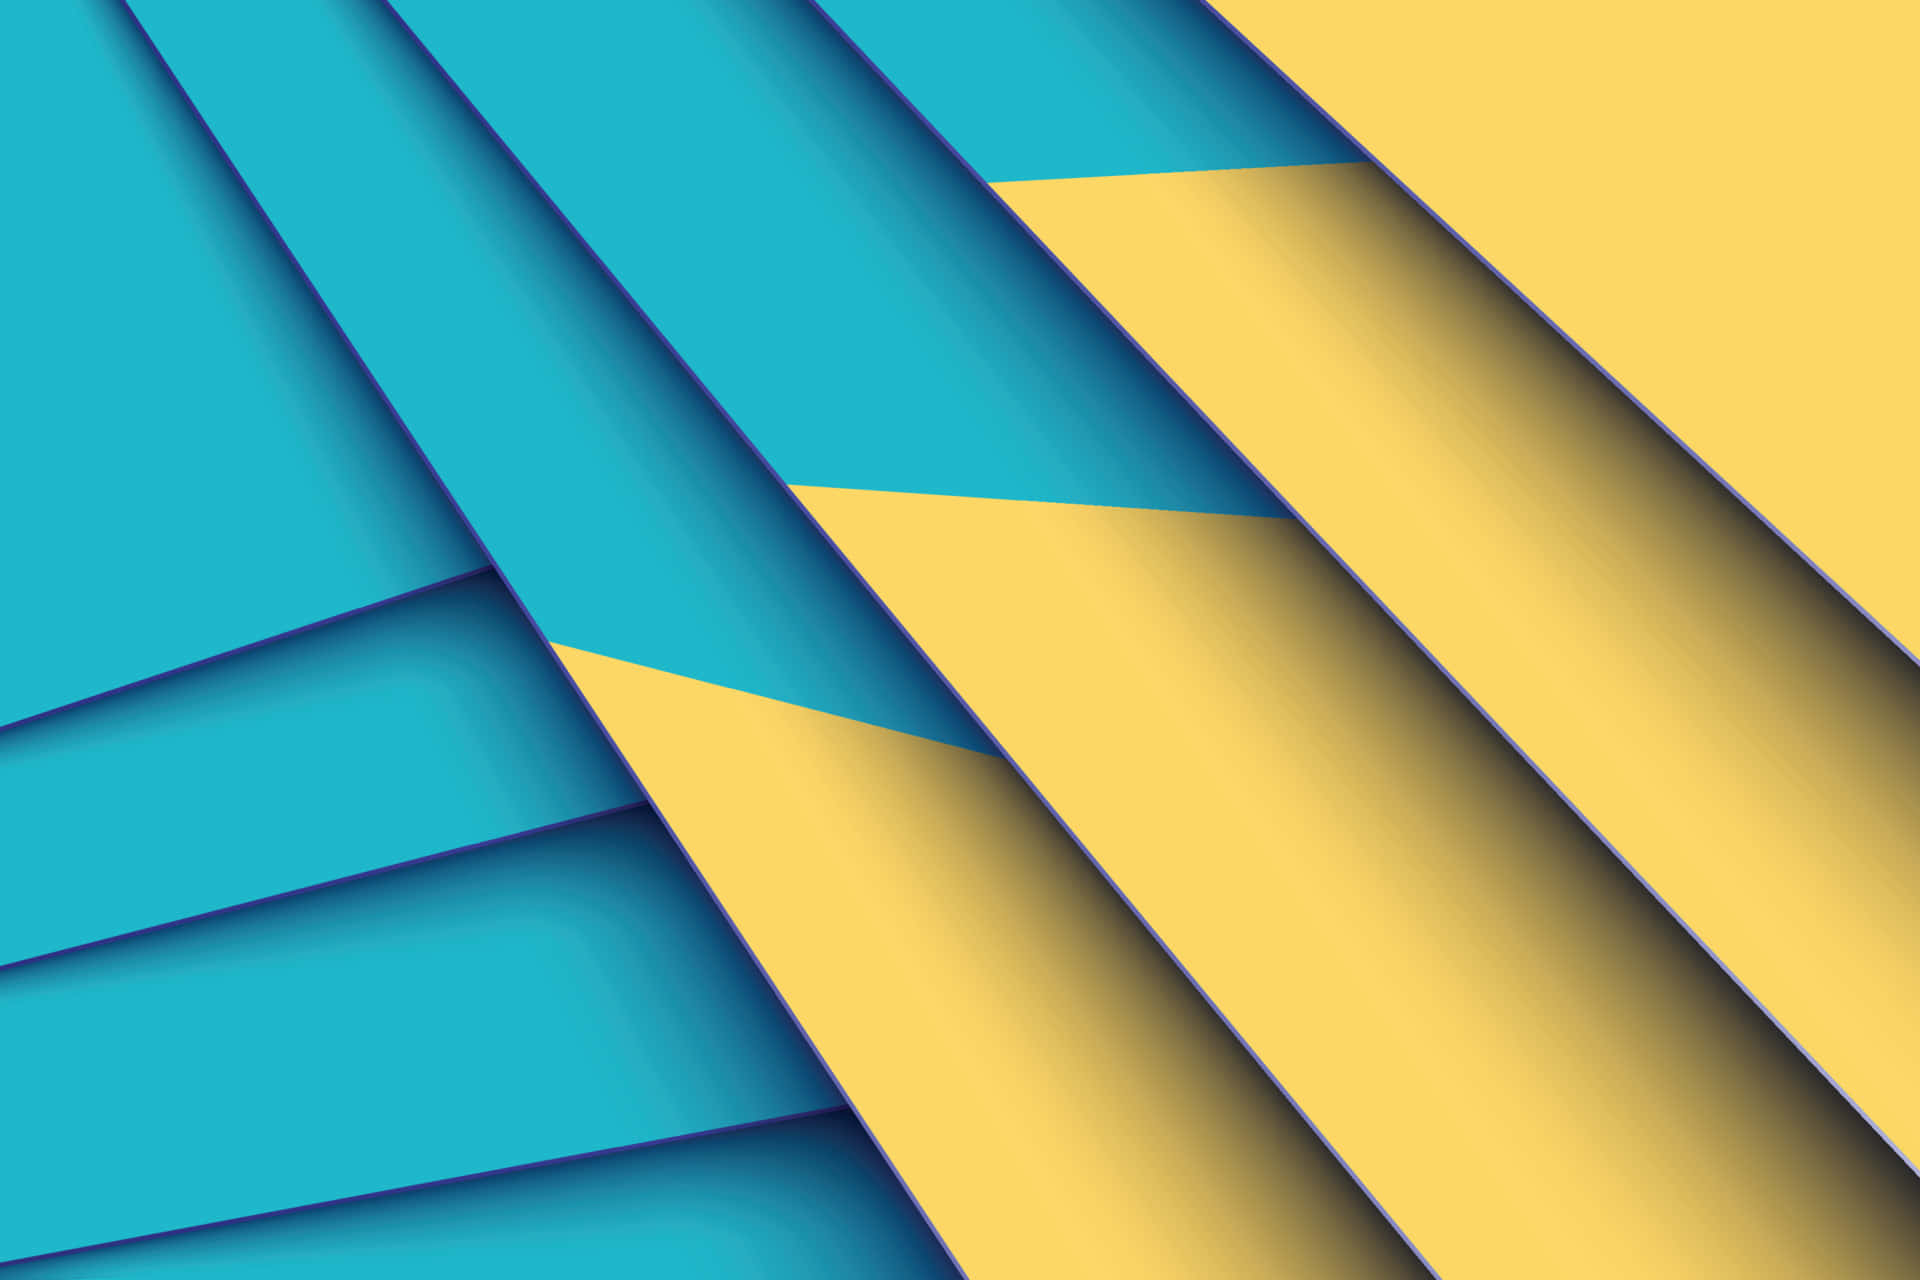 Ukrainian Flag Wallpaper With Blue And Yellow Stripes Wallpaper